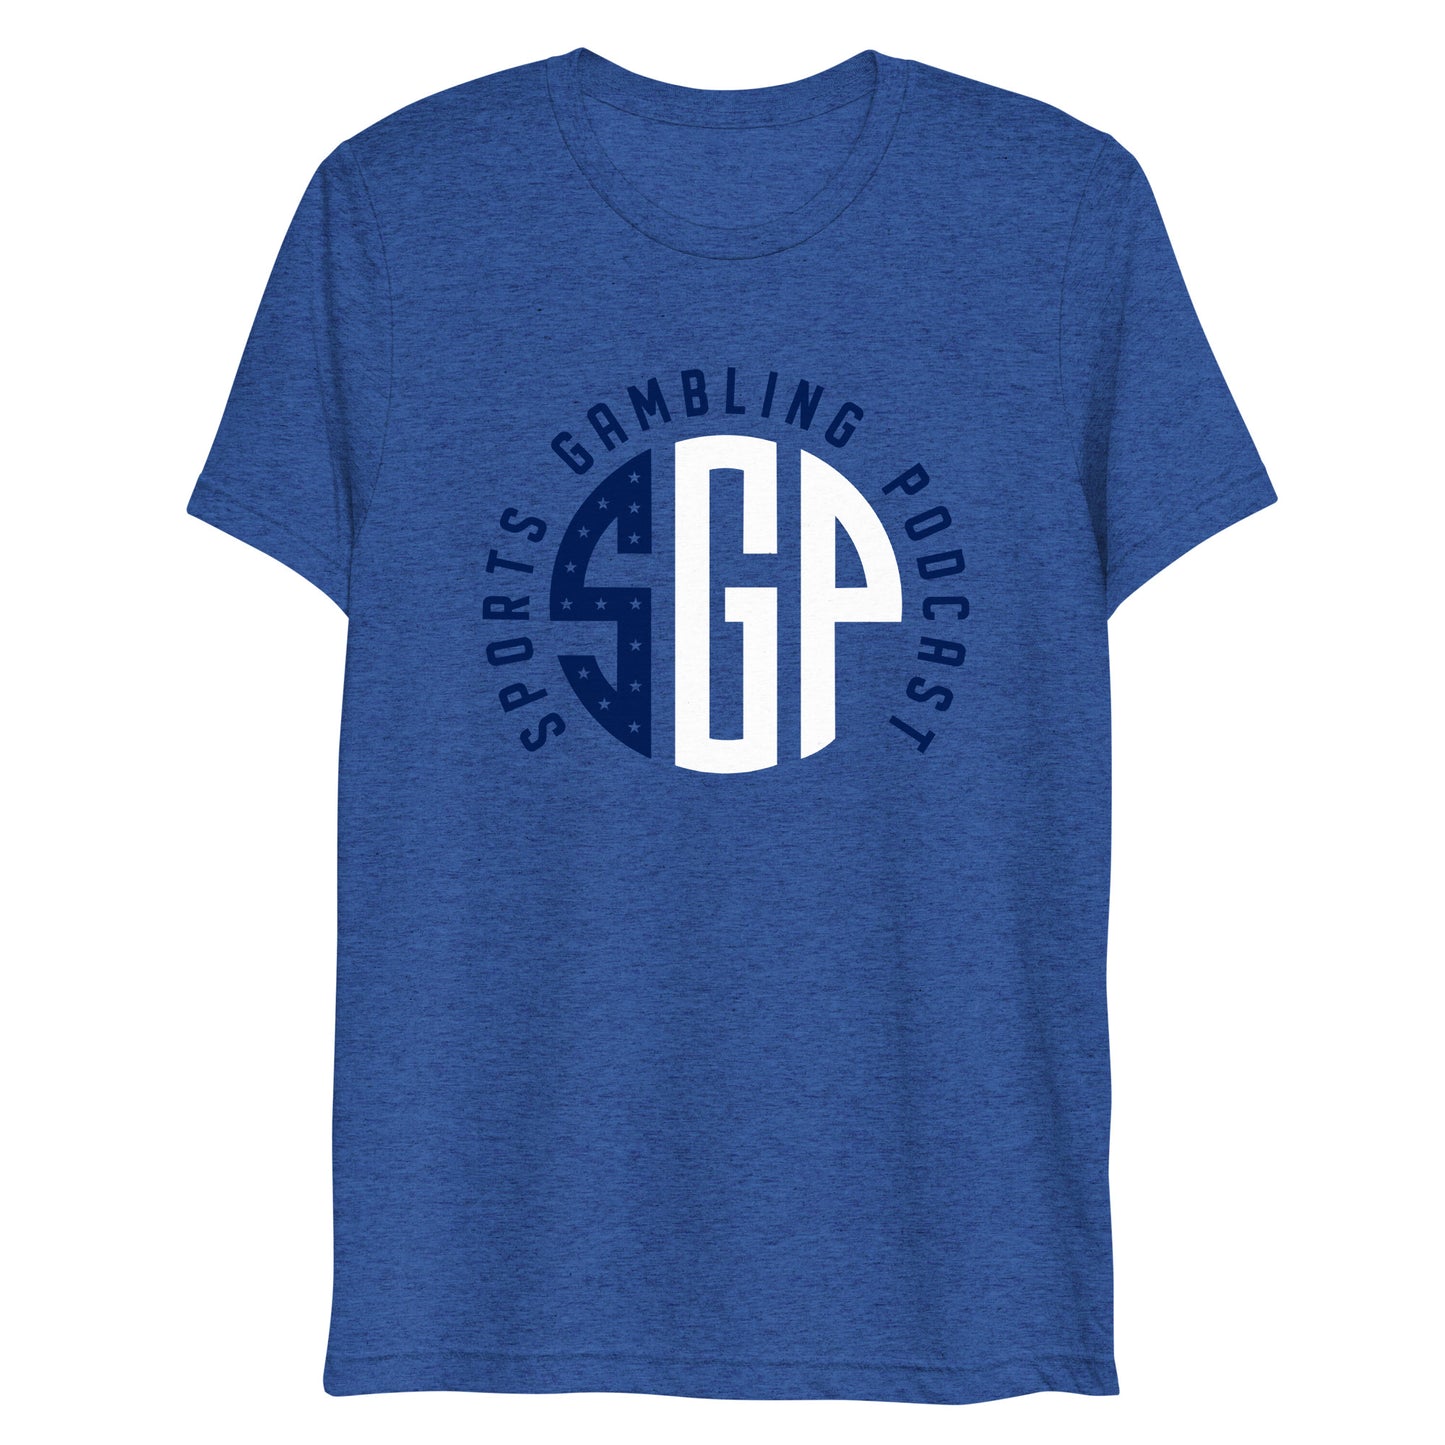 SGP Red, White and Blue Short sleeve t-shirt (Blue Shirts)